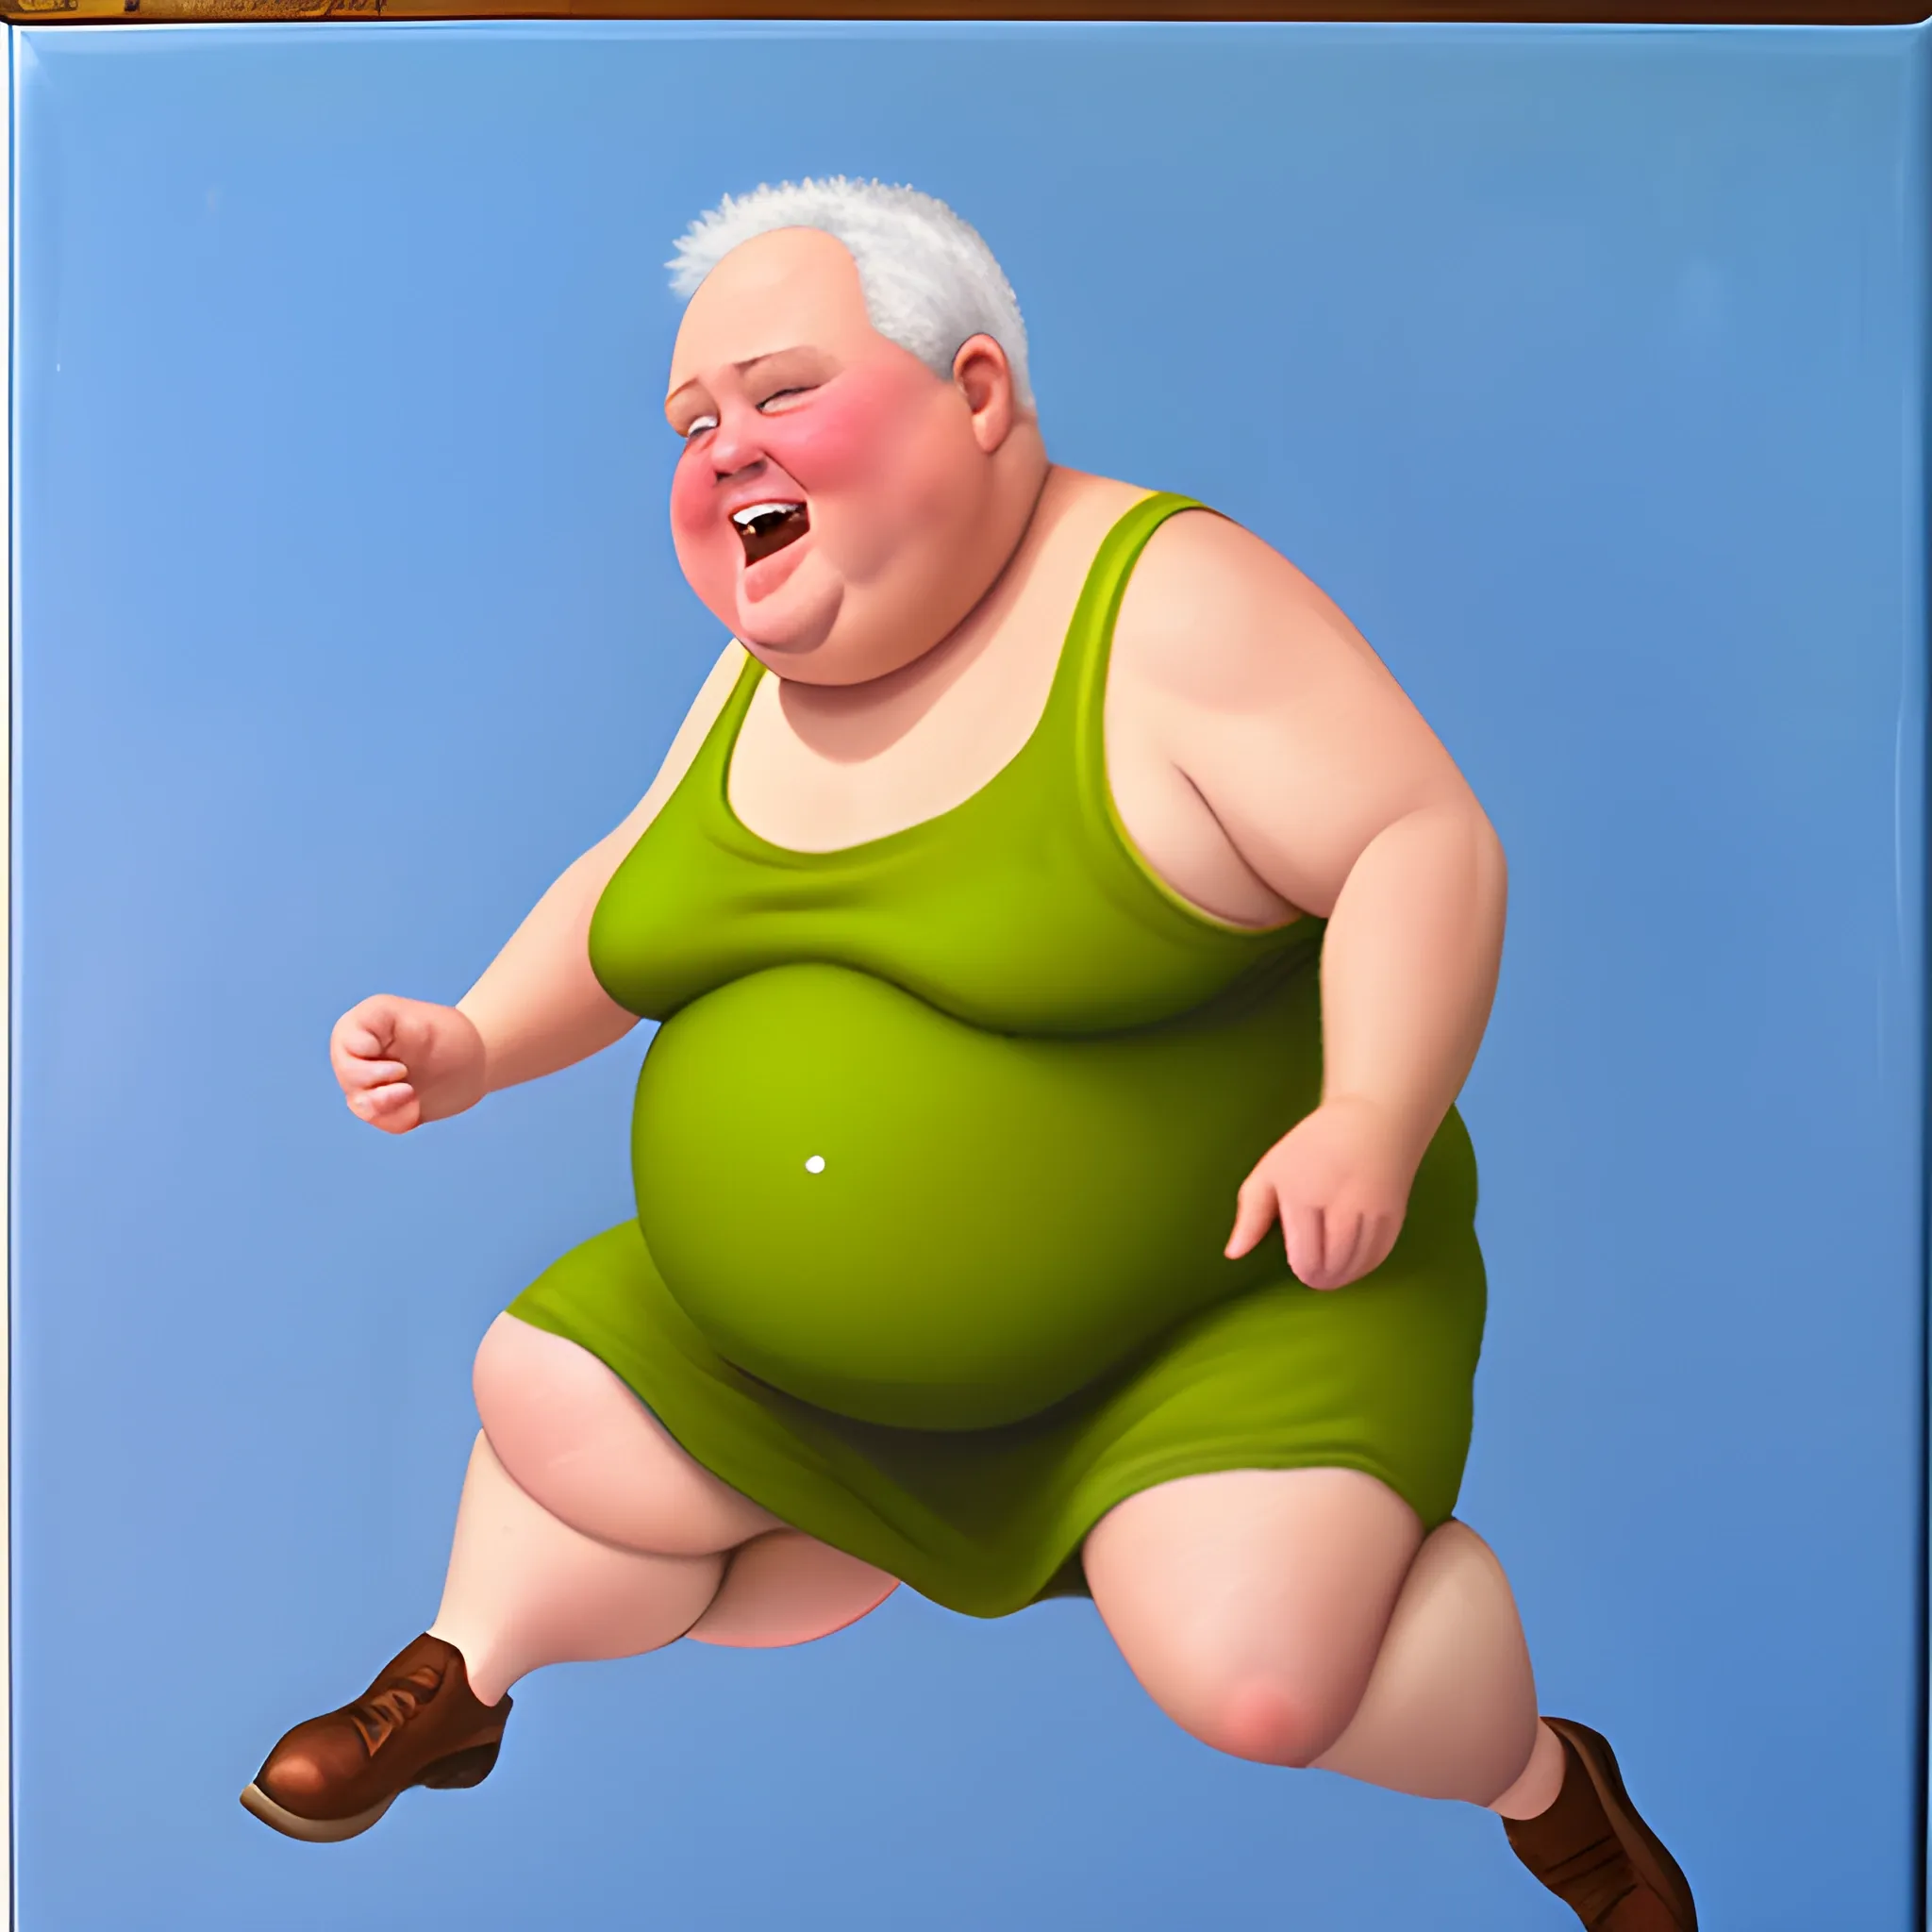 Old fat man jumping with mini dress, Oil Painting